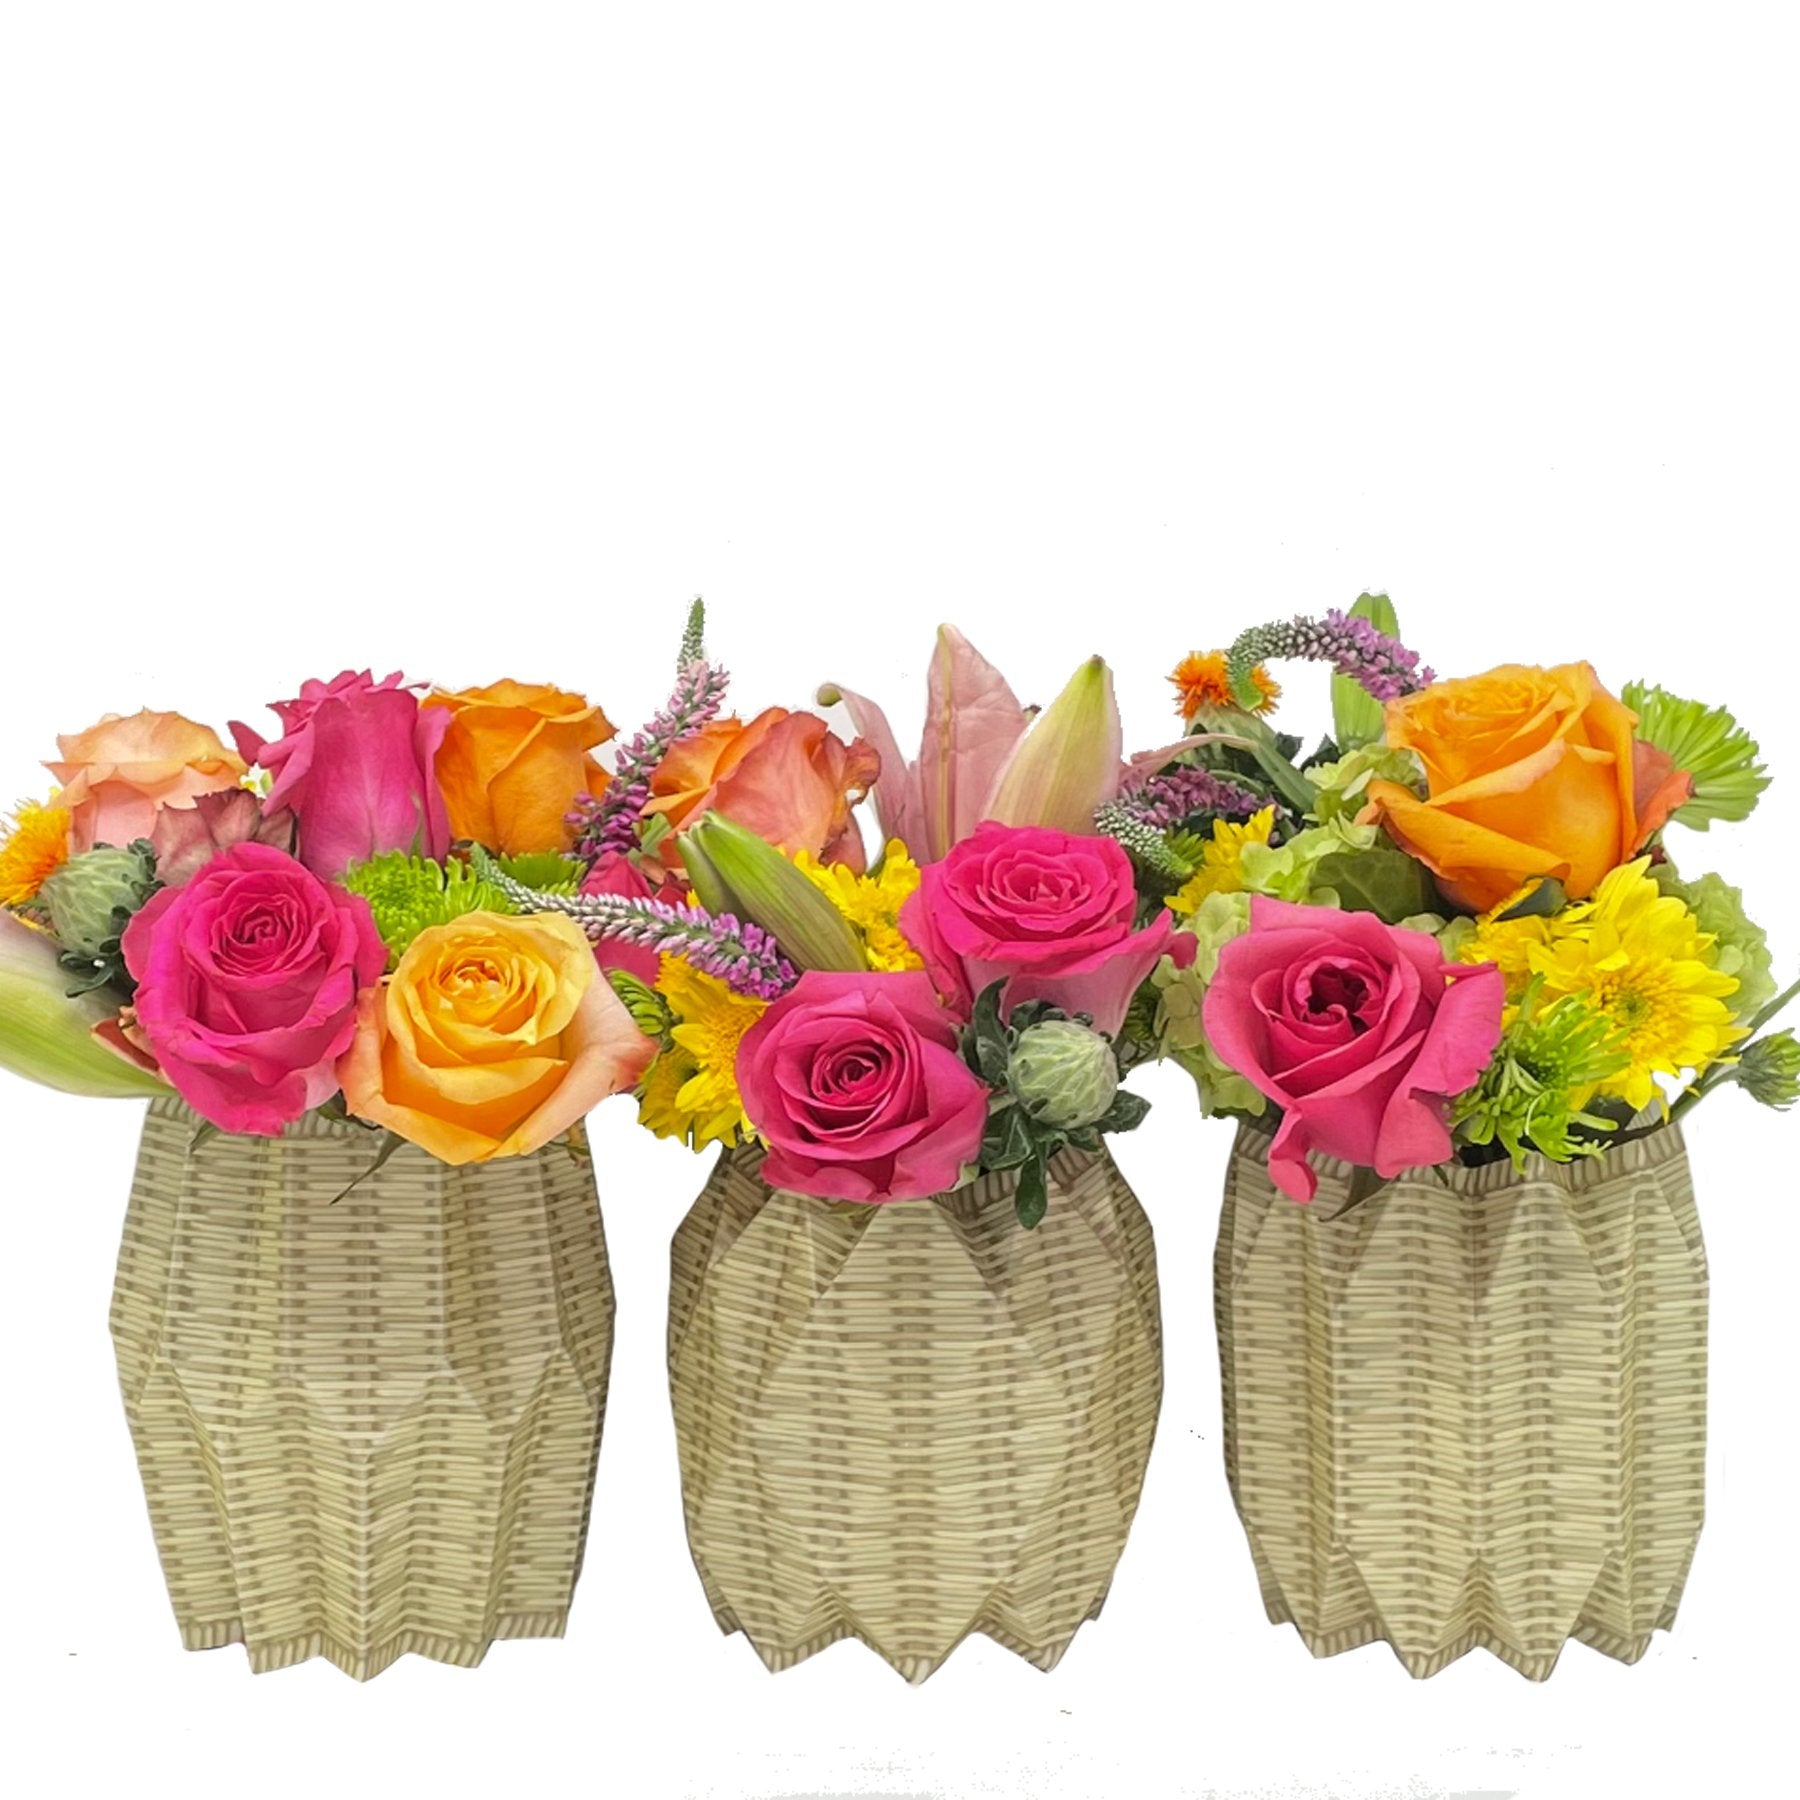 Wicker patterned paper vases with fall flowers